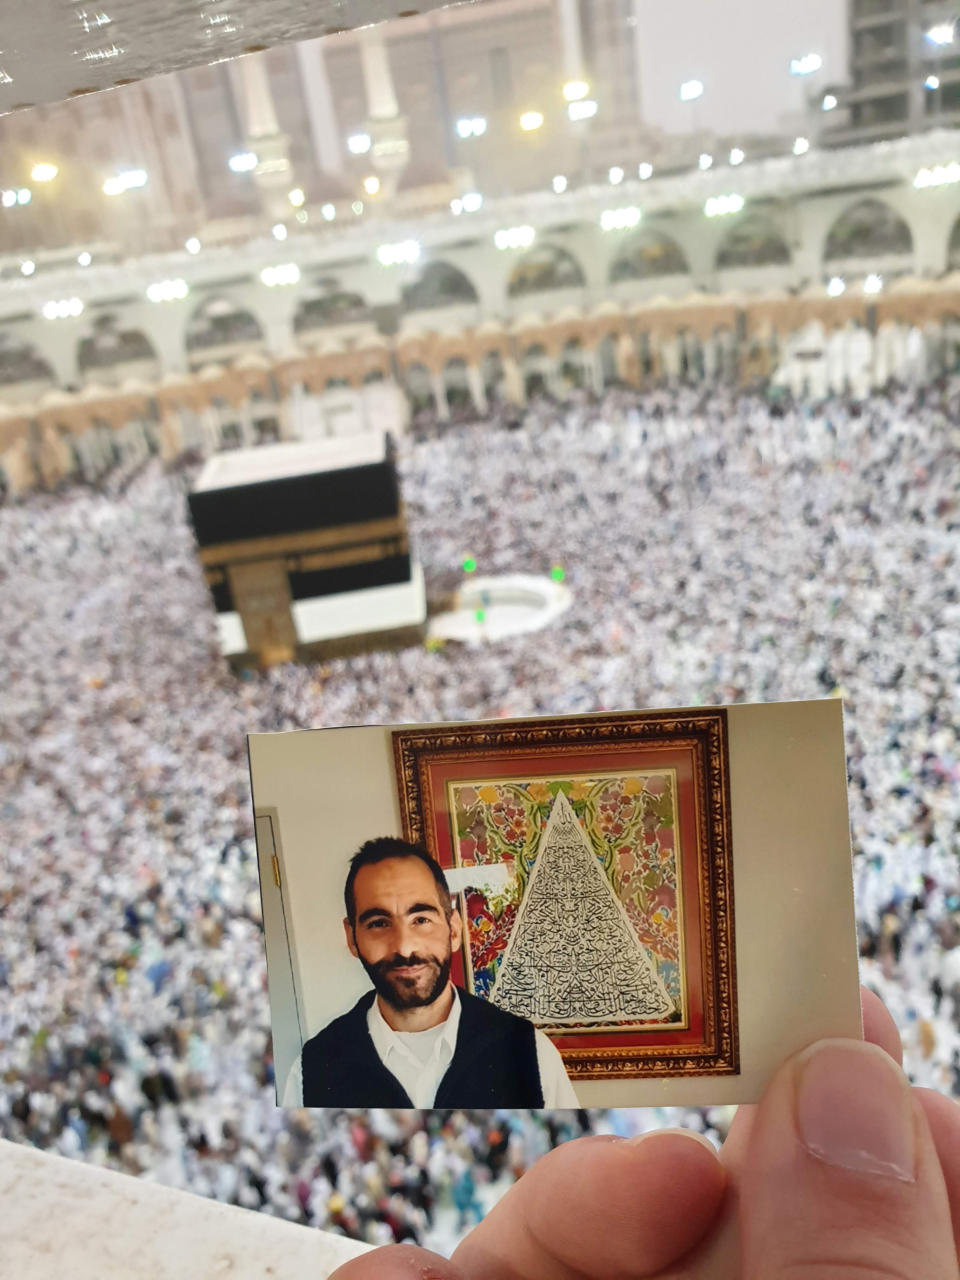 In this Aug. 6, 2019, photo provided by Aya Al-Umari, a photo of Al Noor mosque shooting victim, Hussein Al-Umari is held at the Great Mosque of Mecca, al-Ka bah al-Musharrafah by his sister Aya. Fifty-one people were killed and dozens more injured when a lone gunman attacked two mosques in Christchurch in 2019. New Zealanders on Sunday, March 15, 2020, will commemorate those who died on the first anniversary of the mass killing, as the tragedy continues to ripple through the community. Three people whose lives were forever altered that day say it has prompted changes in their career aspirations, living situations and in the way that others perceive them. (Aya Al-Umari via AP)